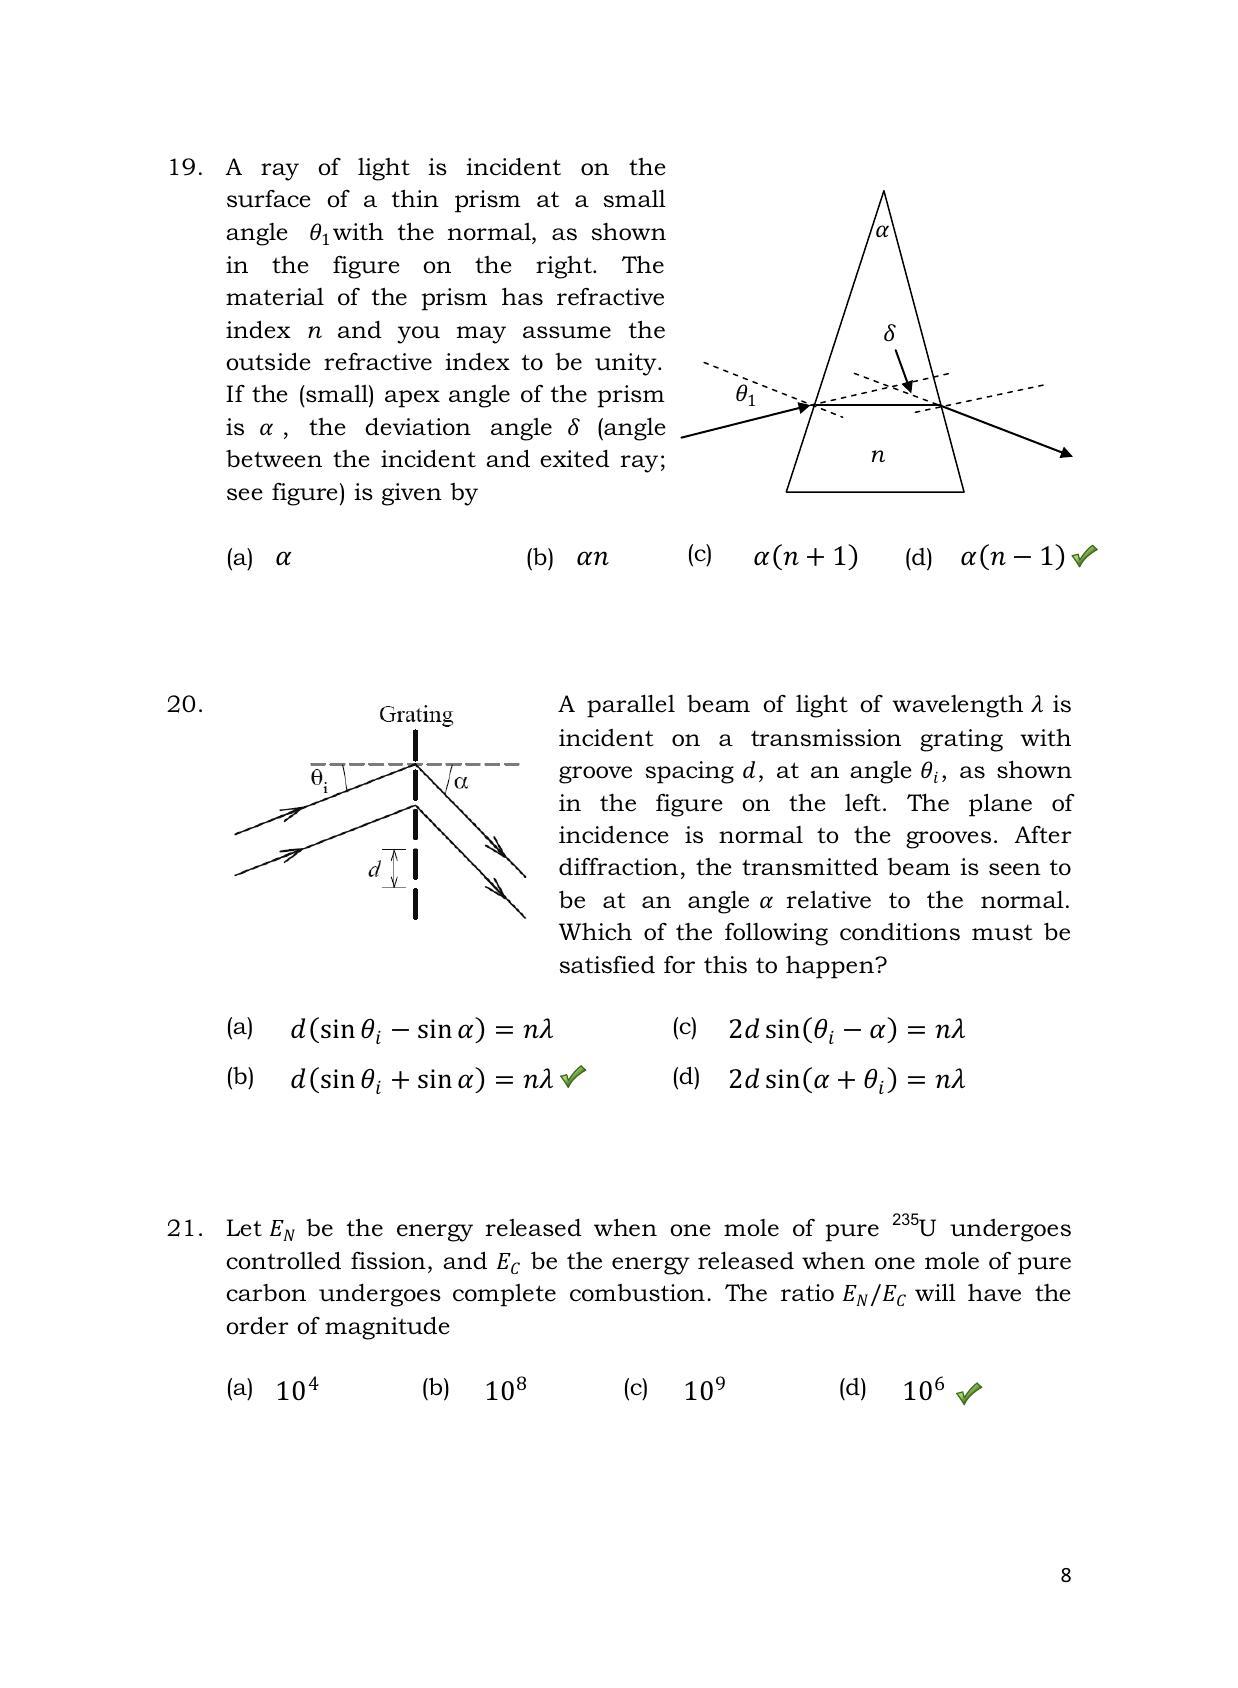 TIFR GS 2013 Physics X Question Paper - Page 9